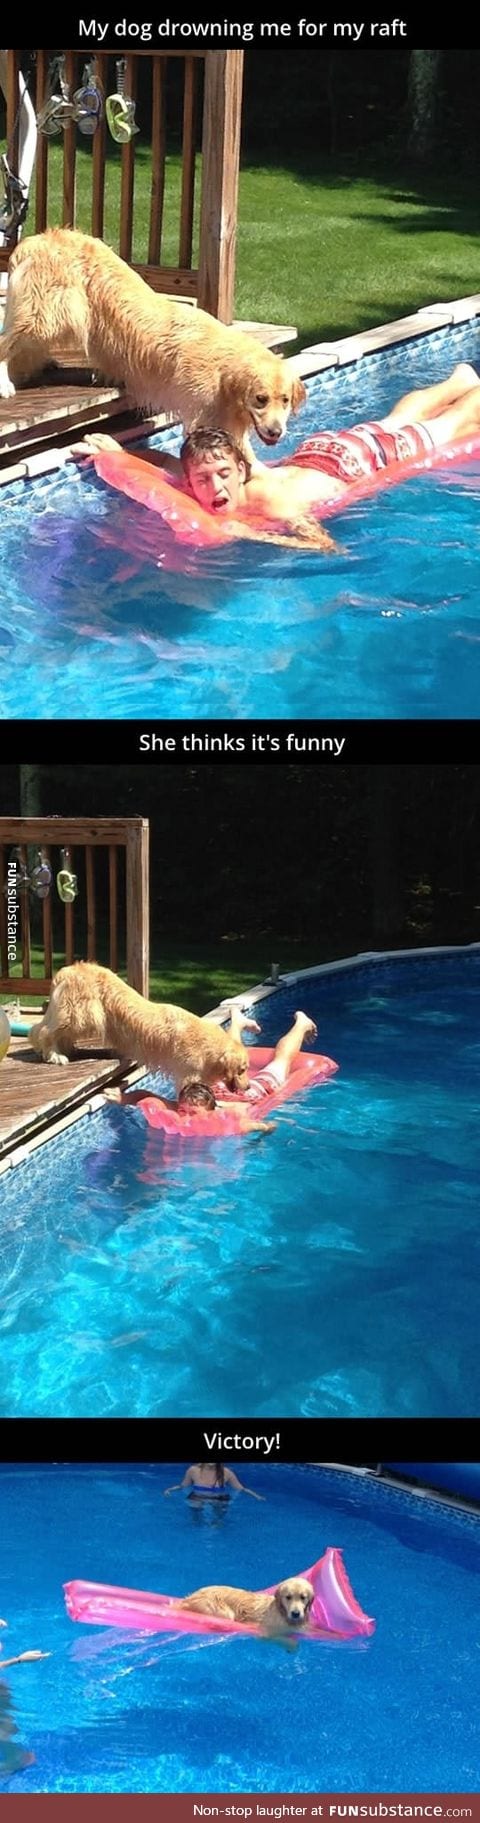 Dog Drowns A Human For The Raft